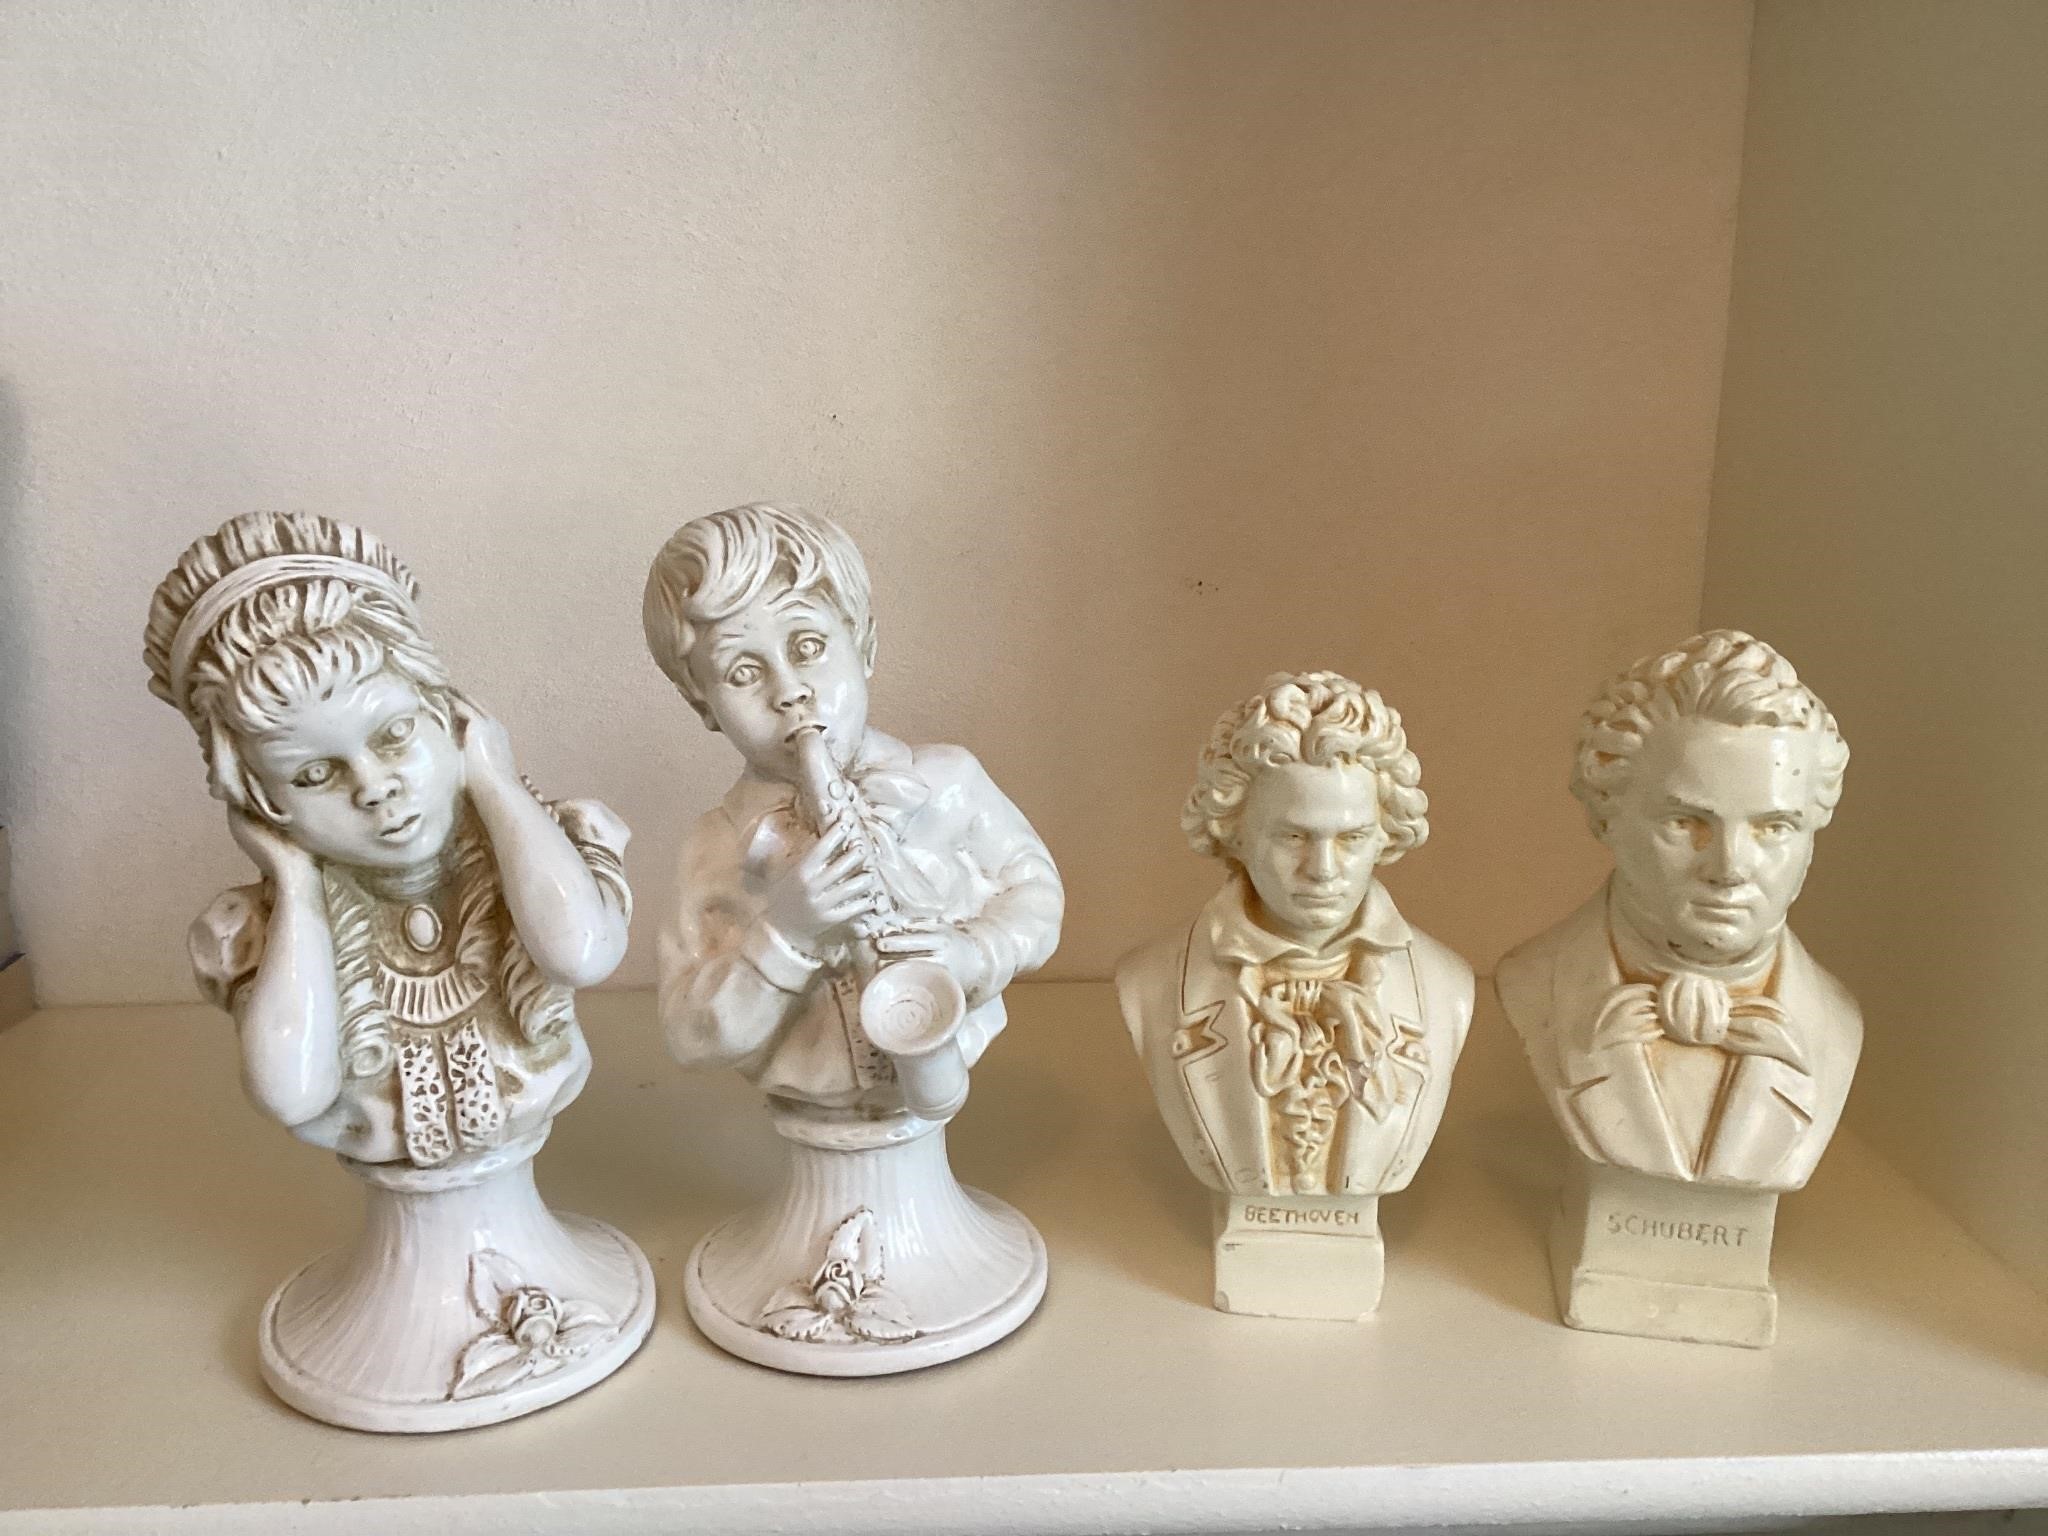 Assorted statues